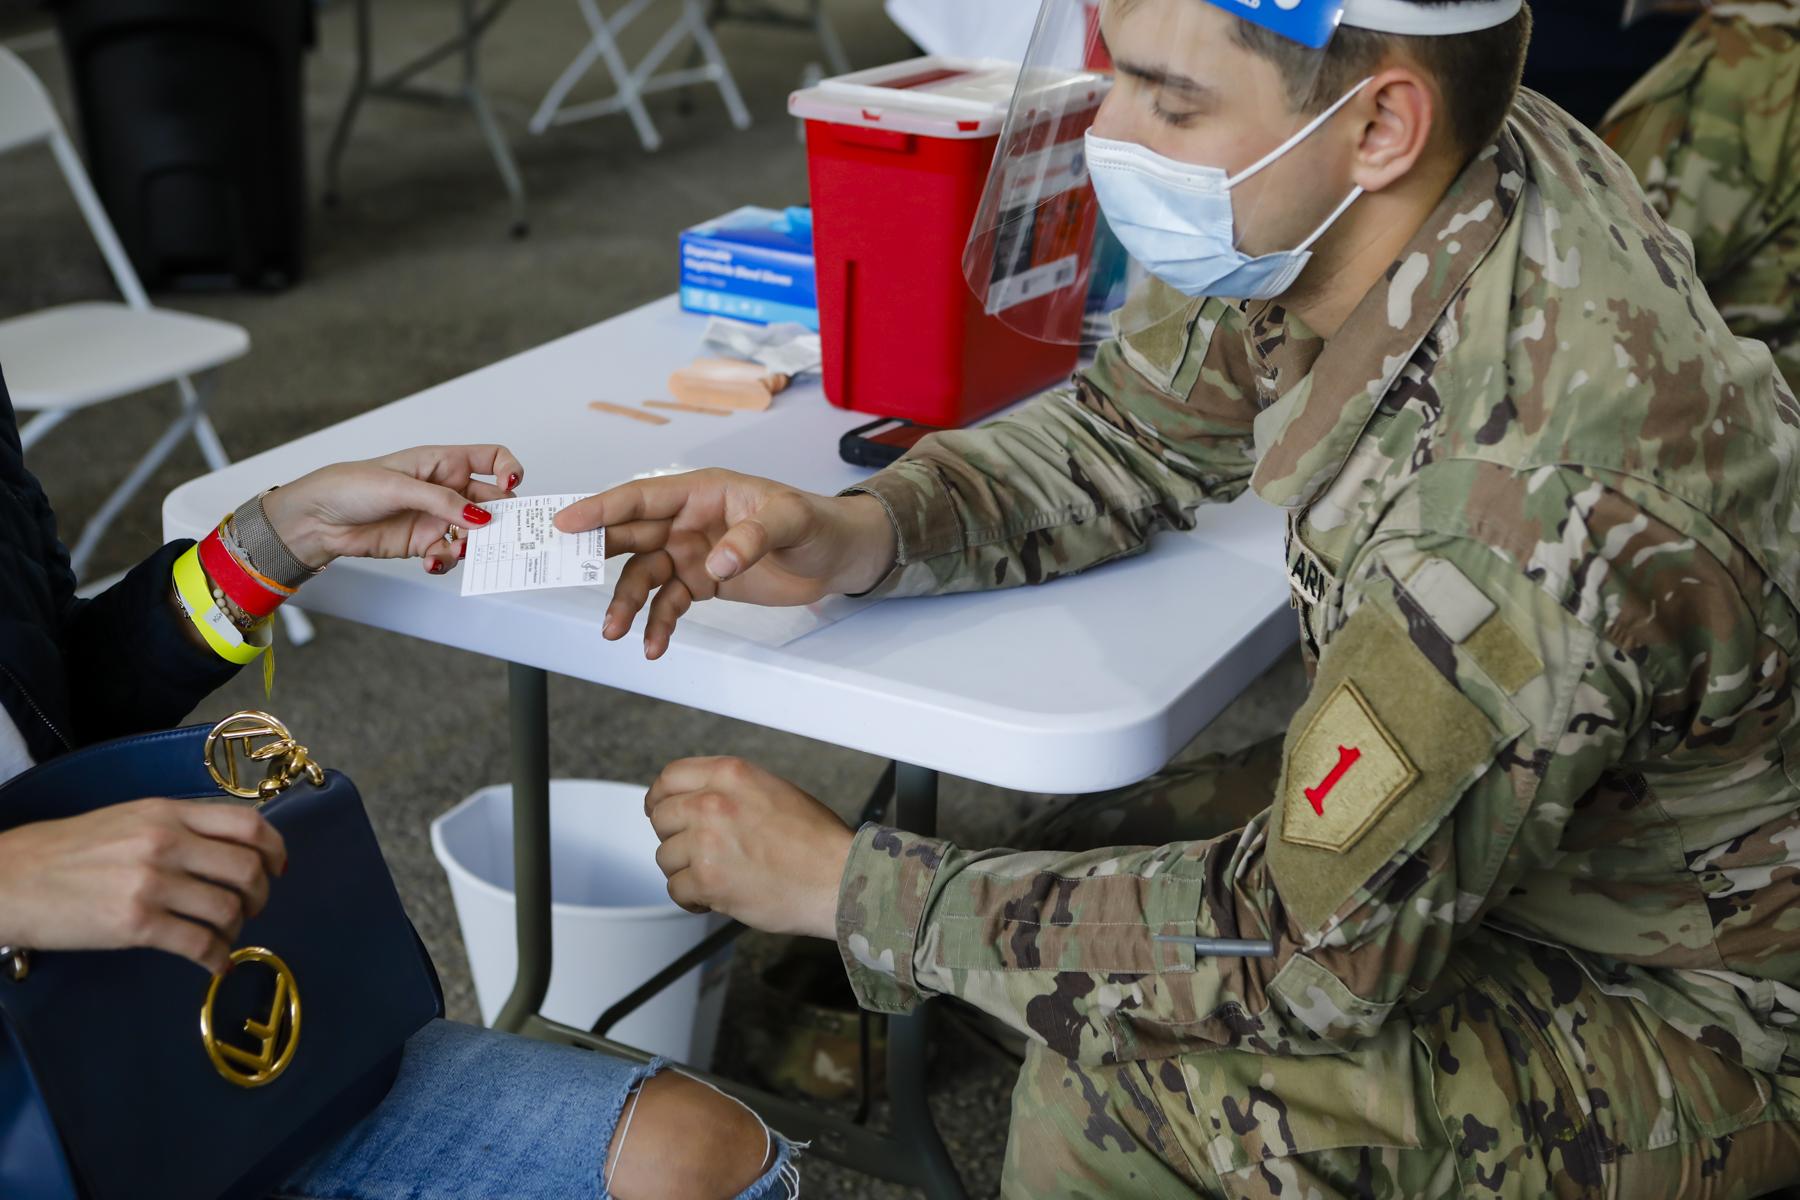 2021  - FEMA vaccination facility in North Miami - A U.S. Army soldier hands out a vaccine card in a...